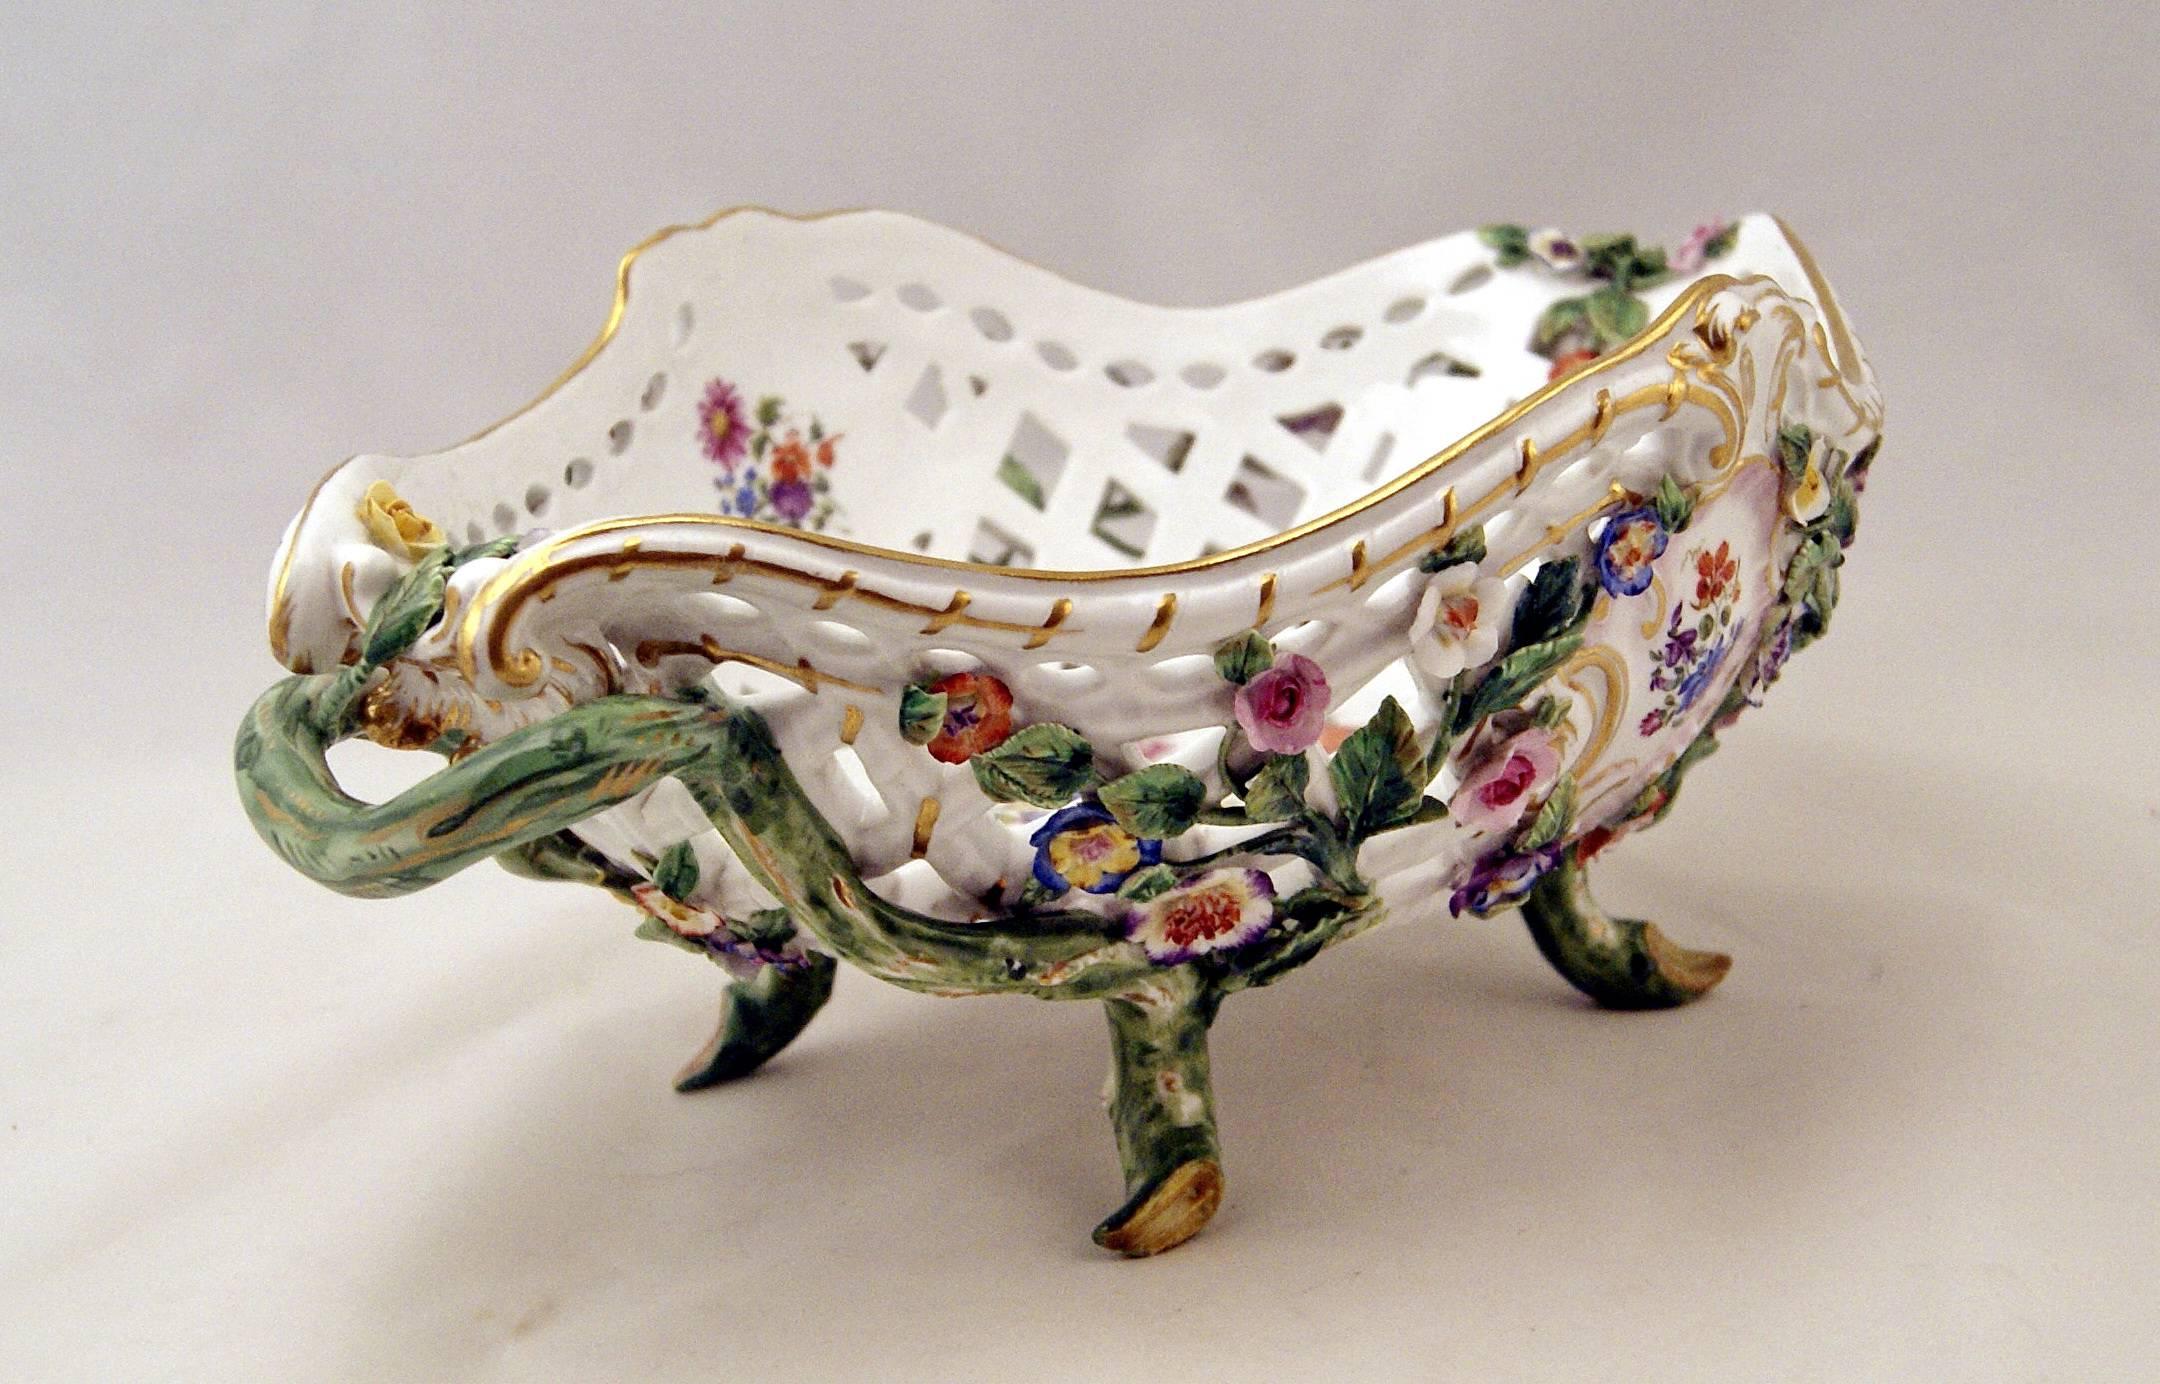 Meissen large oval reticulated basket bowl decorated with sculptured flowers, attached to stems with leaves, based on feet shaped as branches. 

MANUFACTORY:  MEISSEN
DATING:       MADE CIRCA  1850 - 1860

THE MEISSEN MARK IS WELL VISIBLE AT